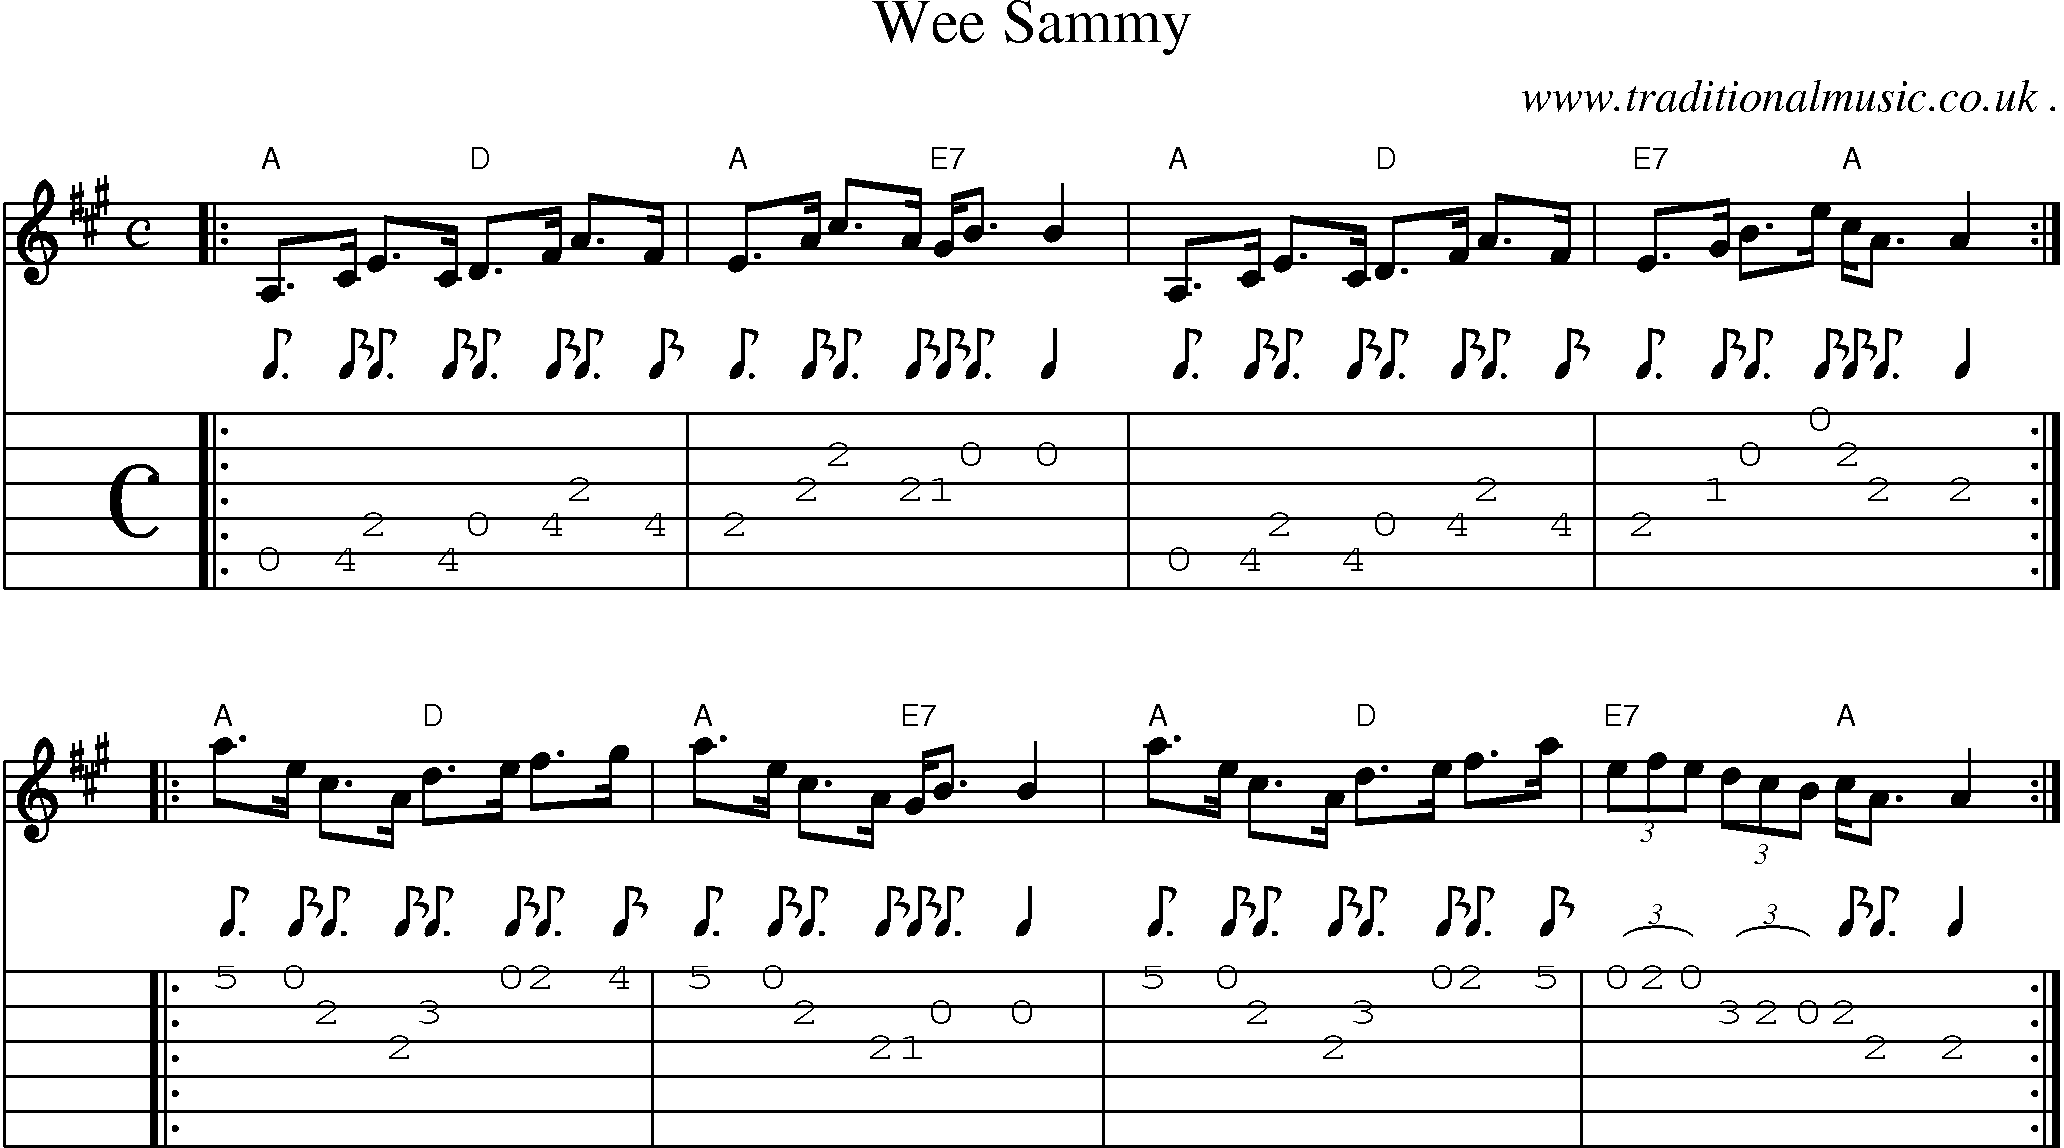 Sheet-music  score, Chords and Guitar Tabs for Wee Sammy